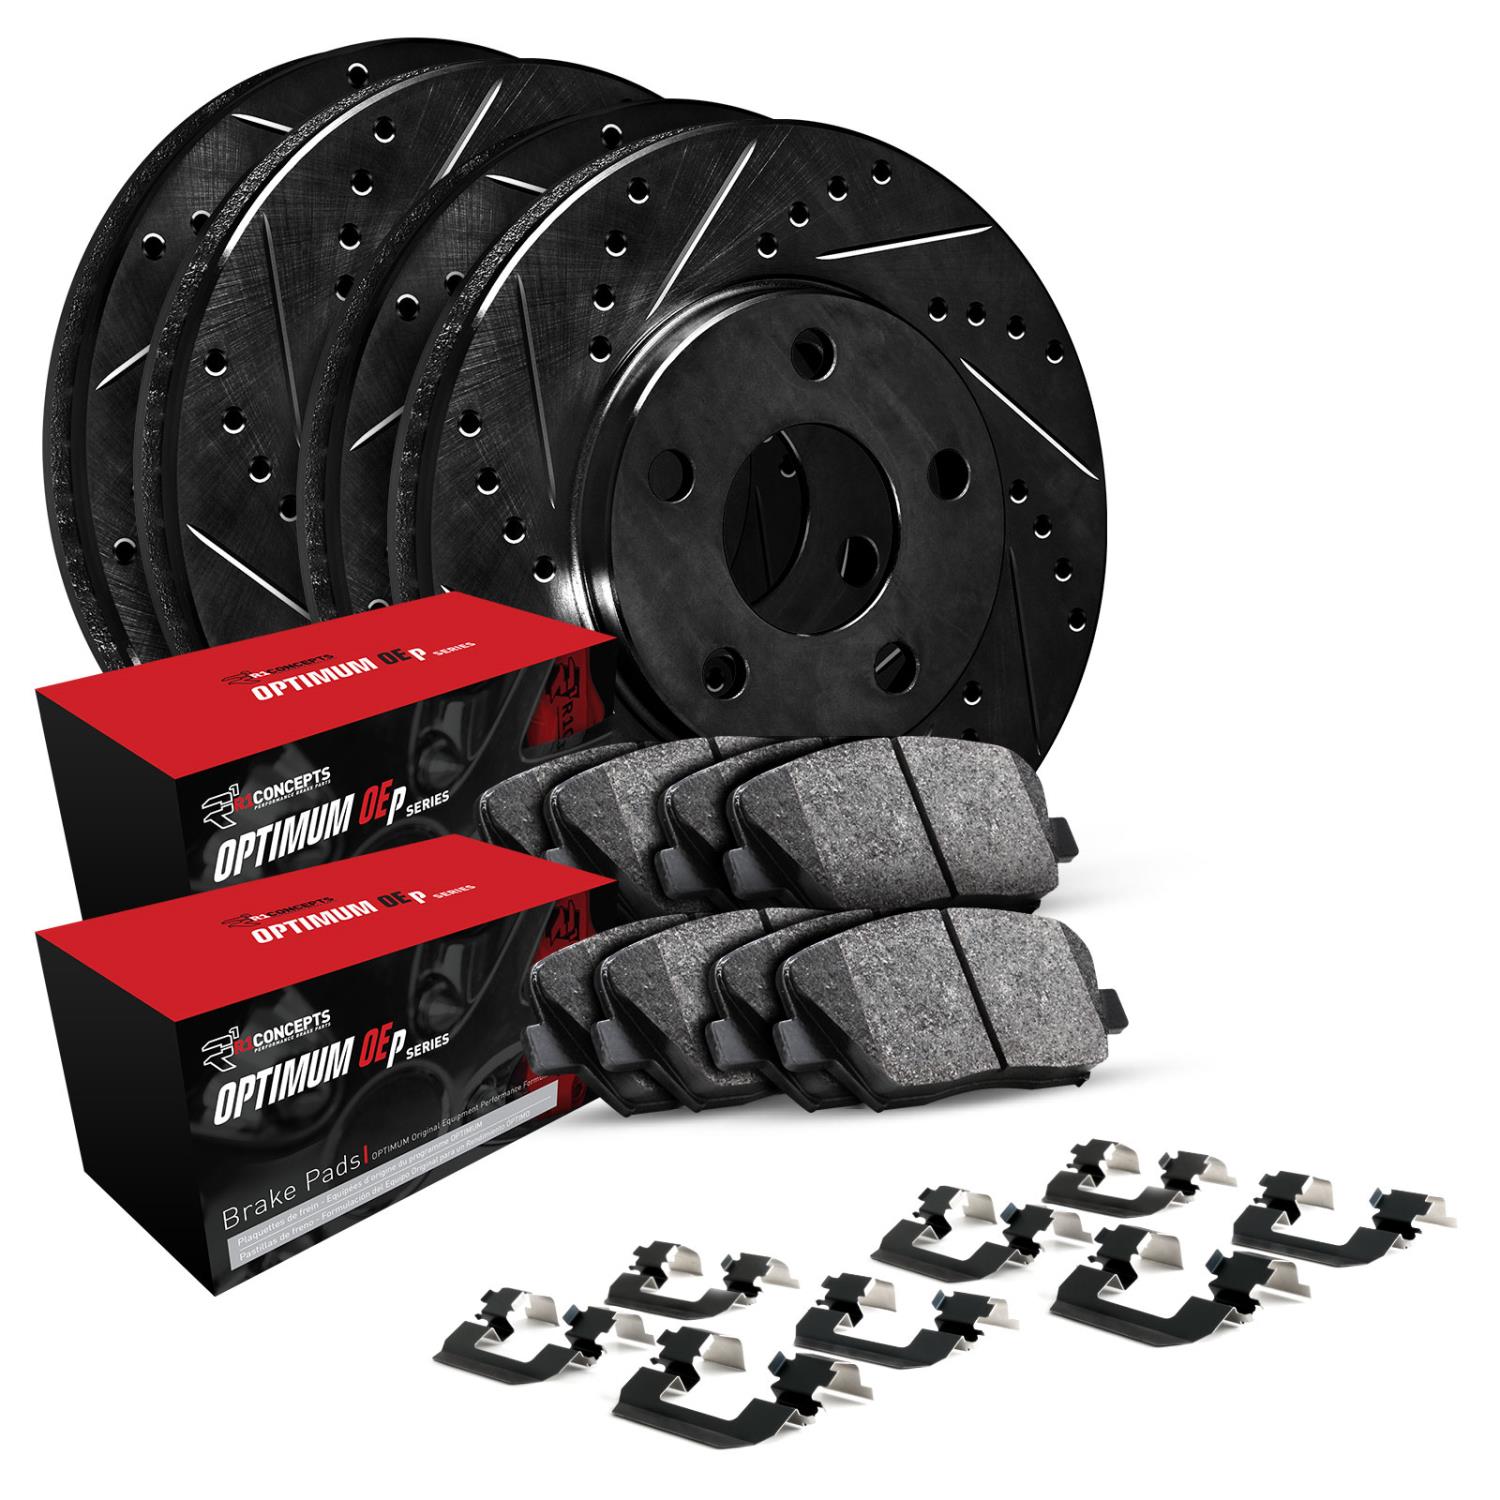 E-Line Drilled & Slotted Black Rotors w/5000 Oep Pads & Hardware Kit, 2009-2014 Fits Multiple Makes/Models